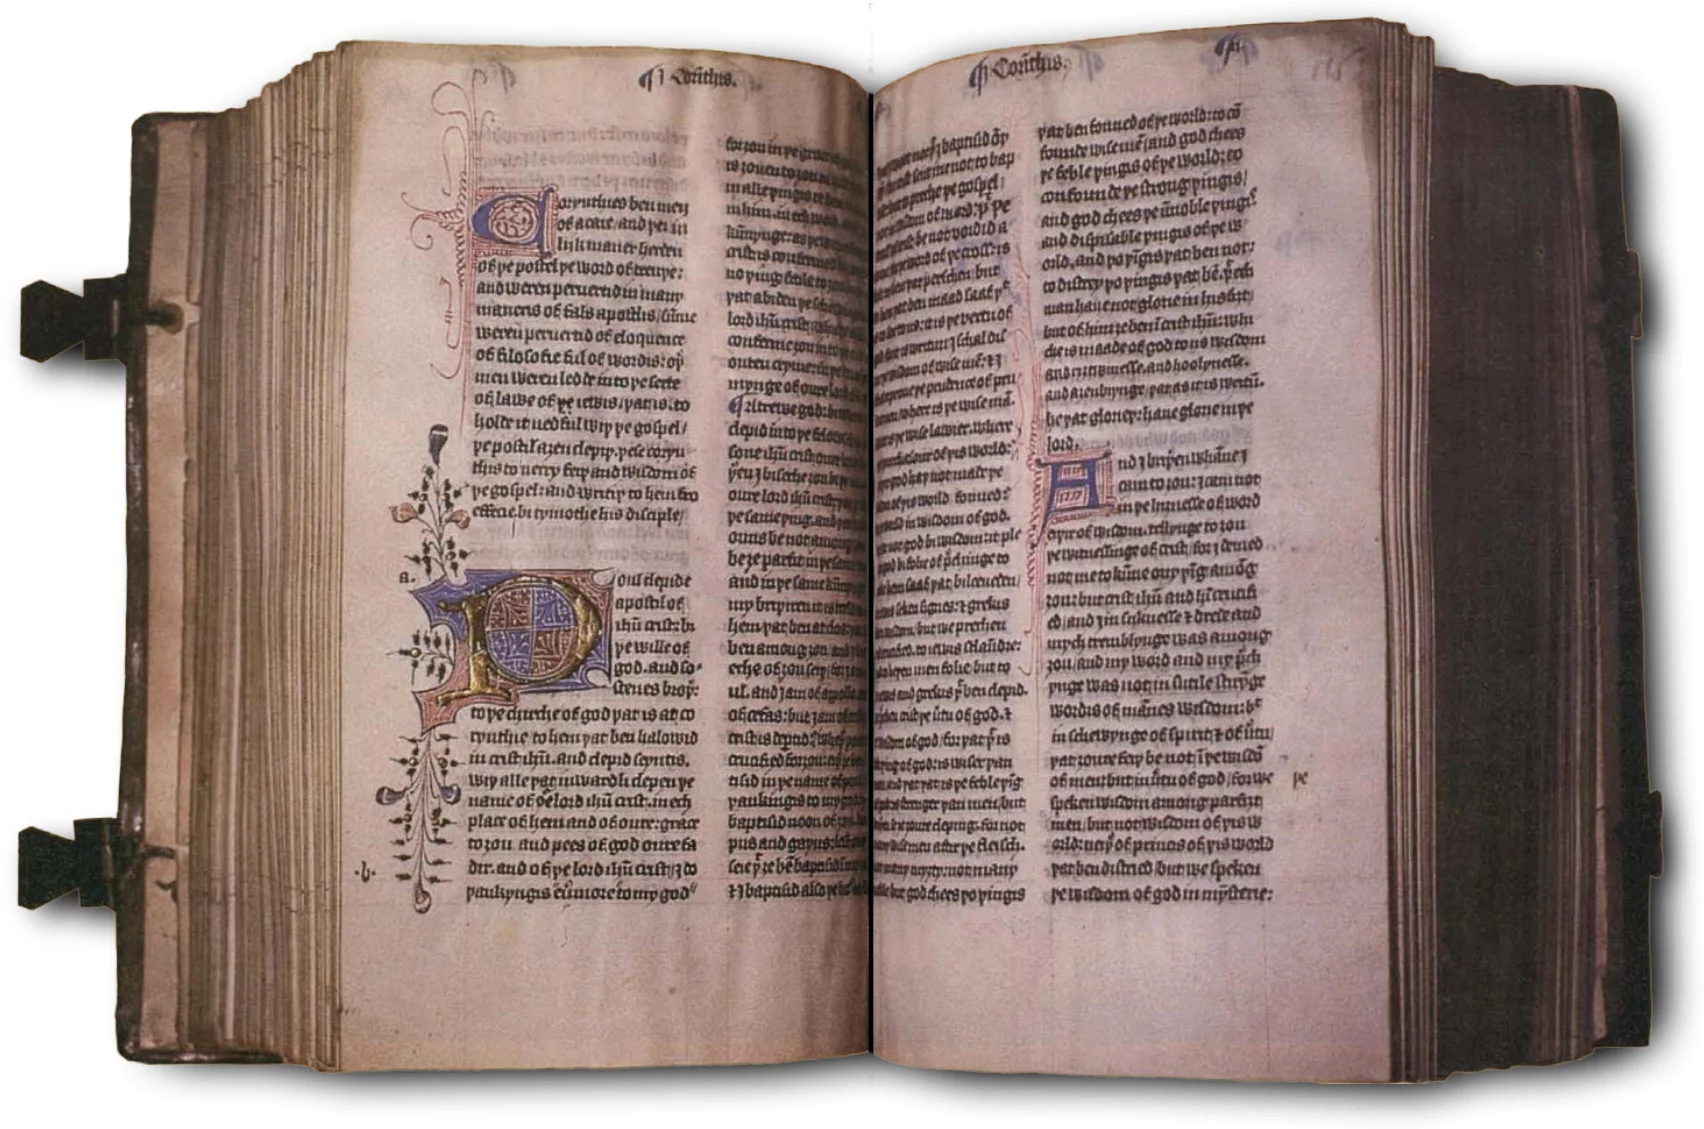 Image of a Wycliffe Bible open at 2 Corinthians